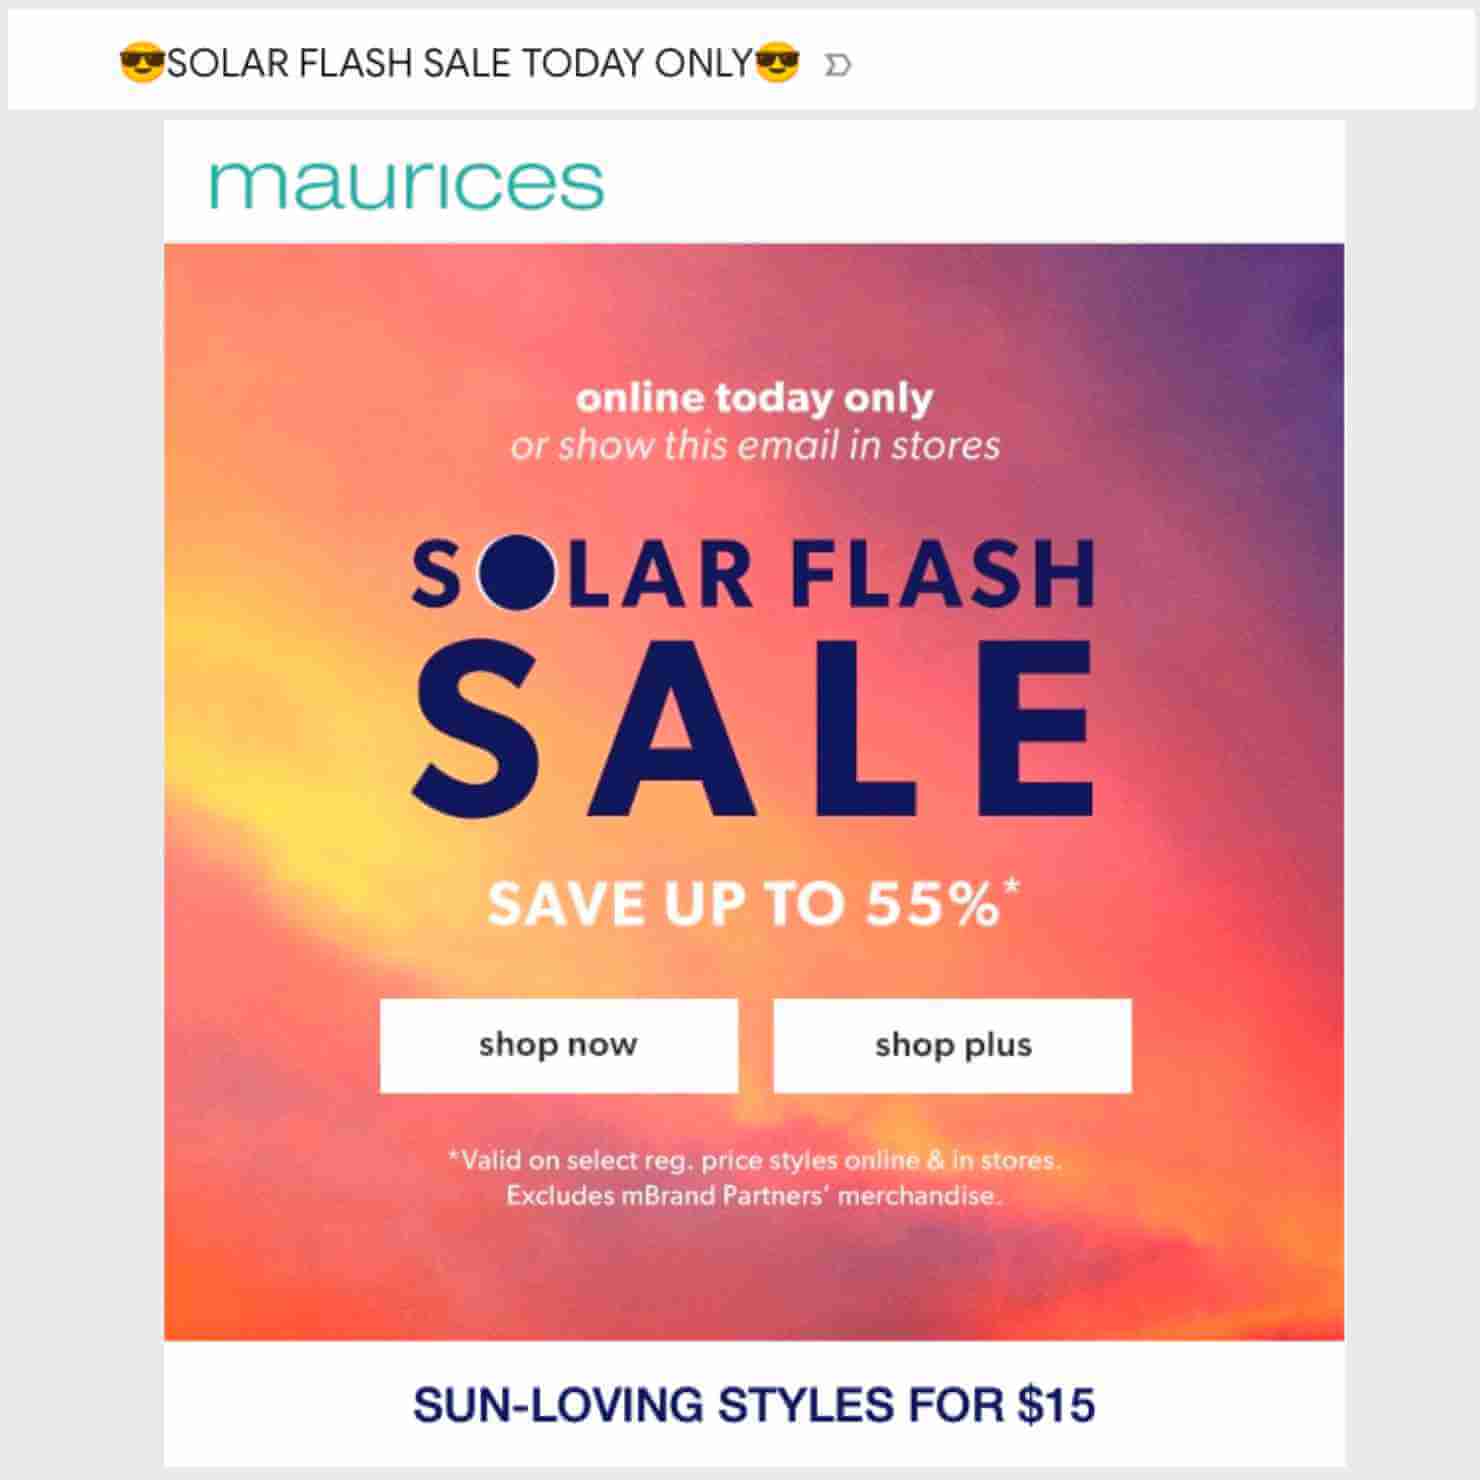 Flash sale example from Maurices. The email subject line says "Solar Flash Sale Today Only (sunglasses emoji at beginning and end." Email content includes "Solar Flash Sale" with the O in Solar looking like a solar eclipse. "Save up to 55%" Buttons say "Shop now" and "Shop plus." A heading at the bottom says "Sun-loving styles for ," indicating that you can scroll to see examples of products on sale.